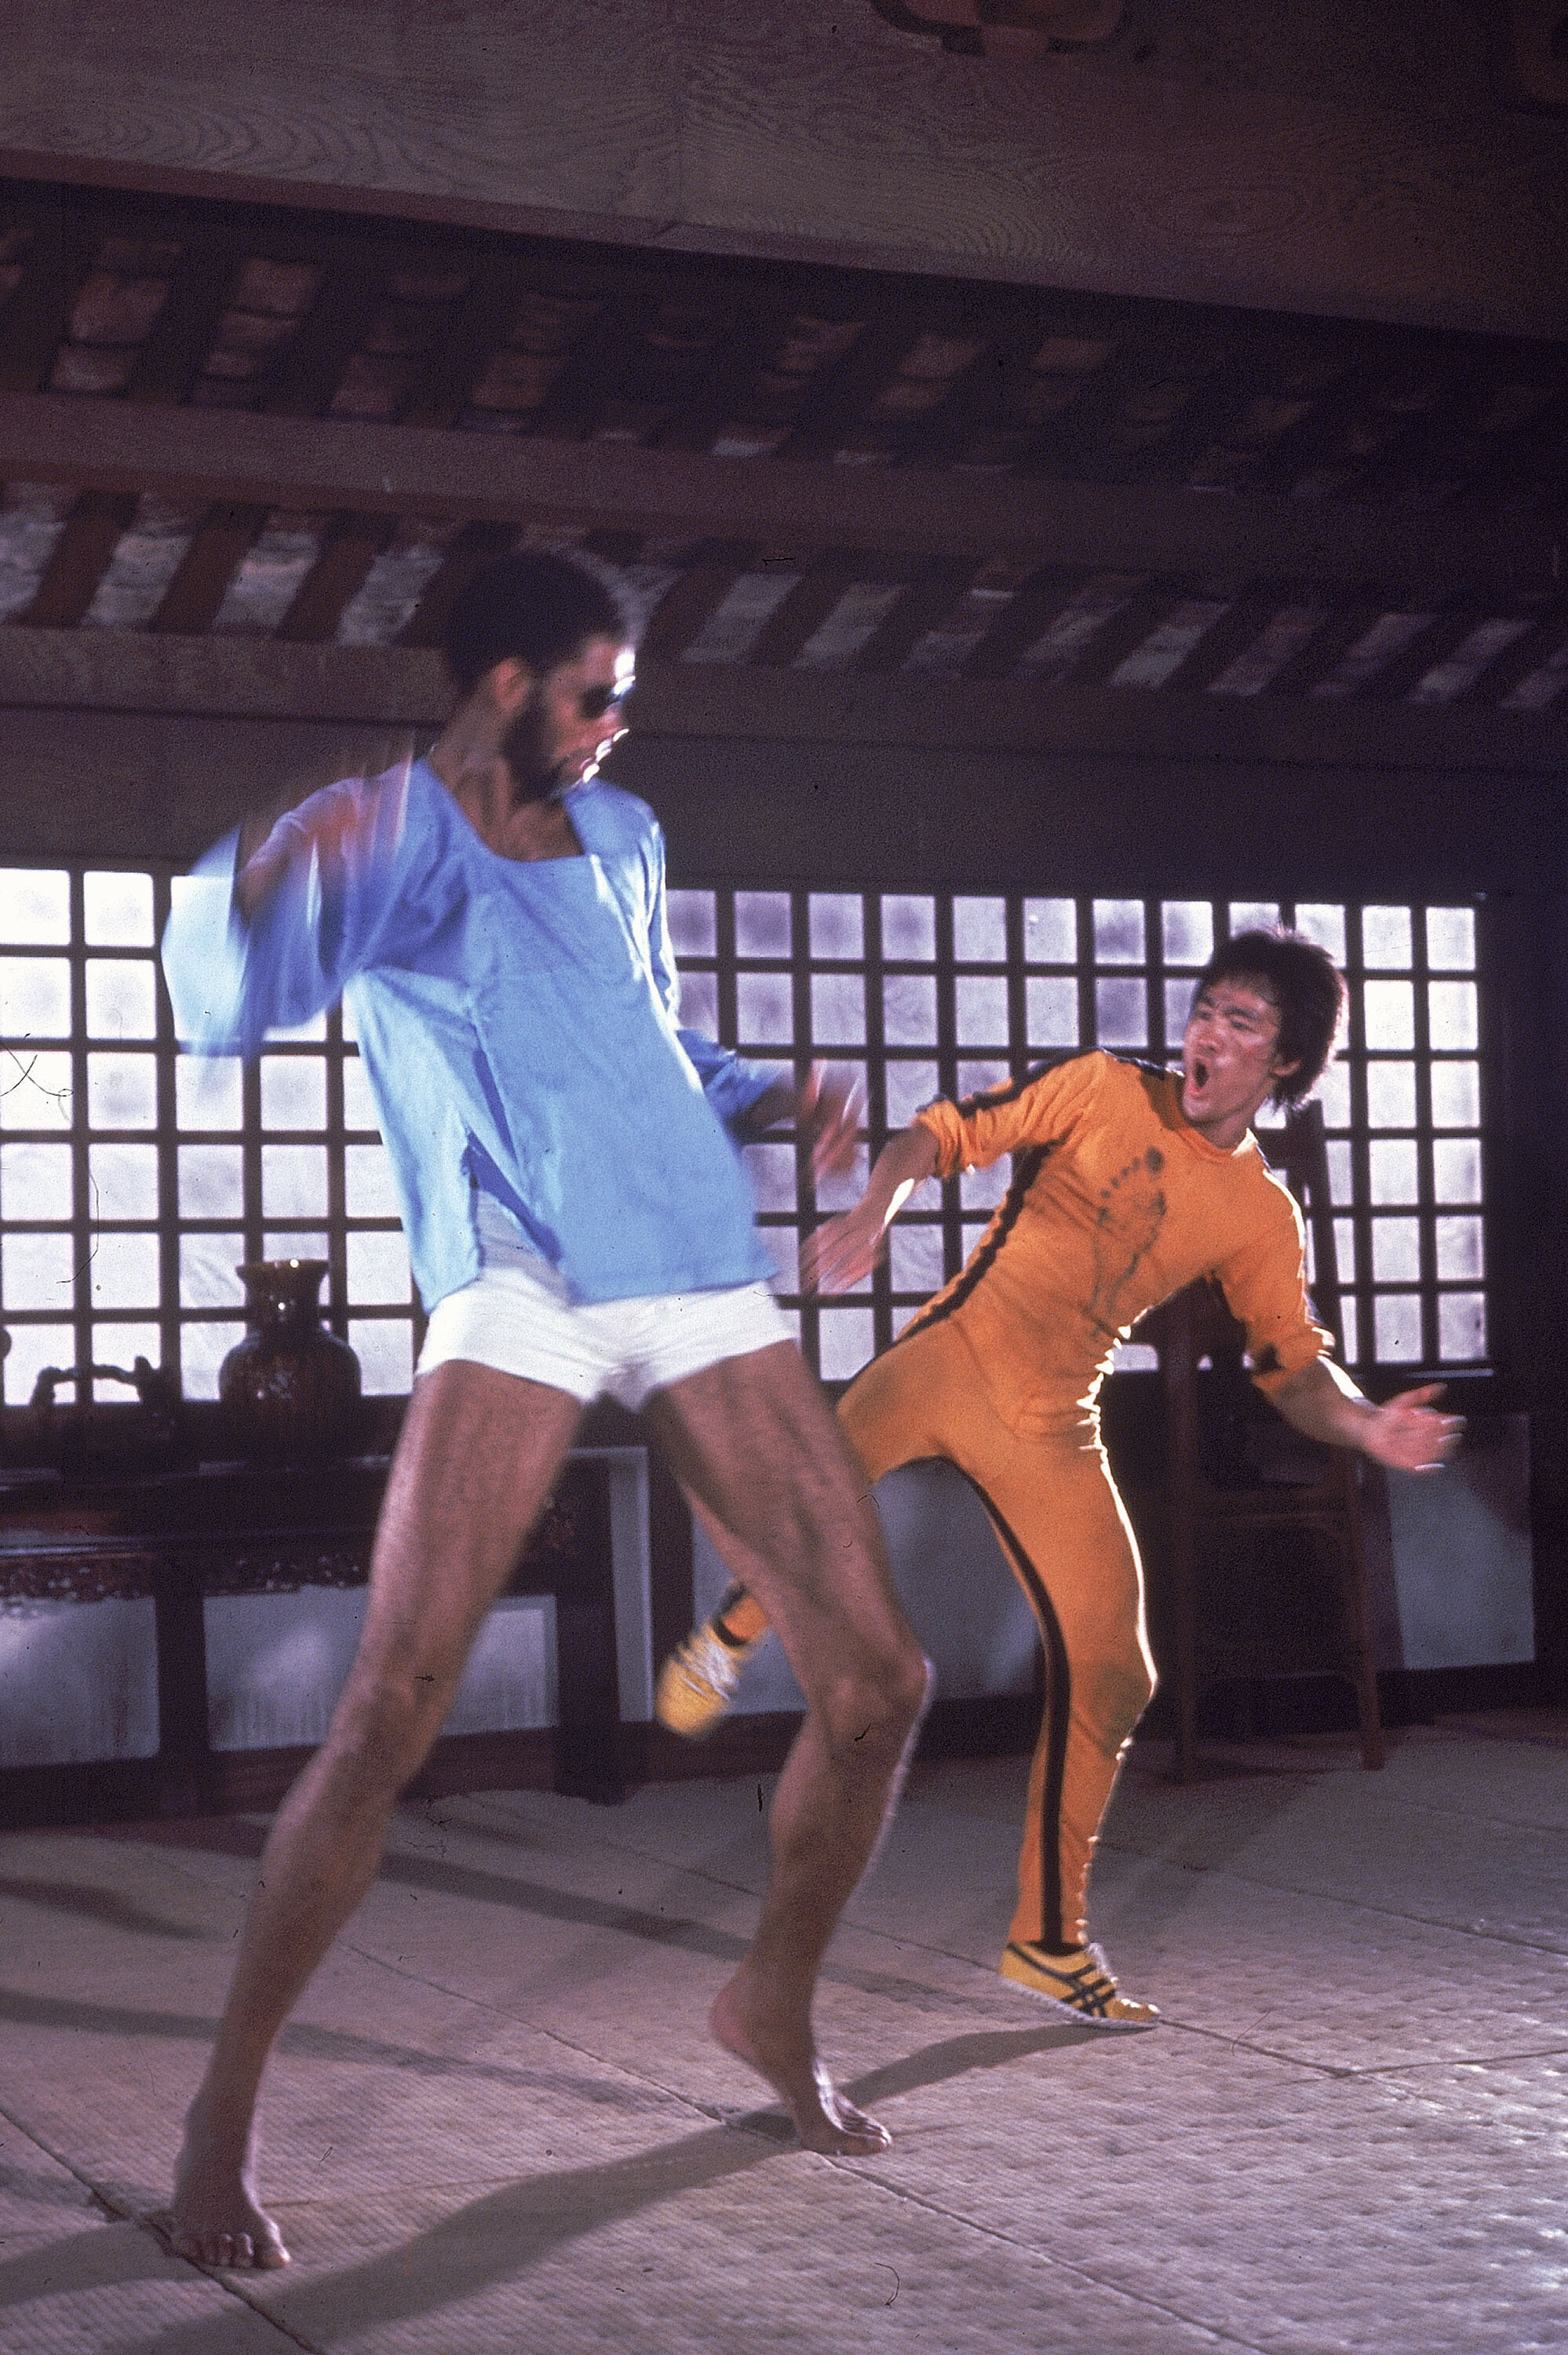  In addition to beauty, business and racist tropes, Americans have from time to time thought of aspects of Chinese culture as extremely cool. Here’s Bruce Lee practicing kung-fu with one of his famous students—Kareem Abdul-Jabbar.  